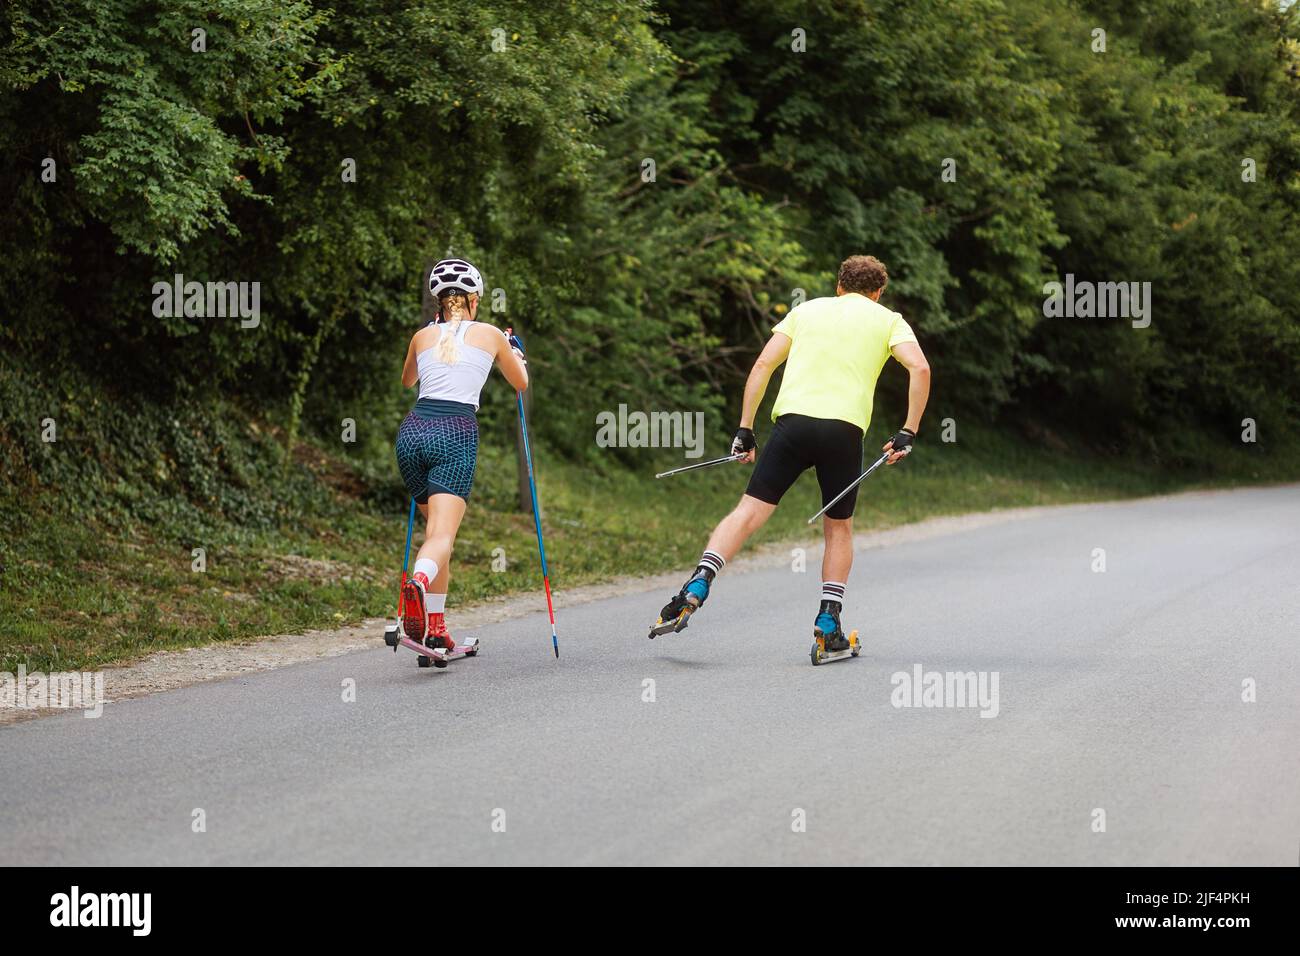 Athletic woman and man together training on the roller ski. Back view. Copy space. Concept of competition, biathlon, and summer workout. Stock Photo